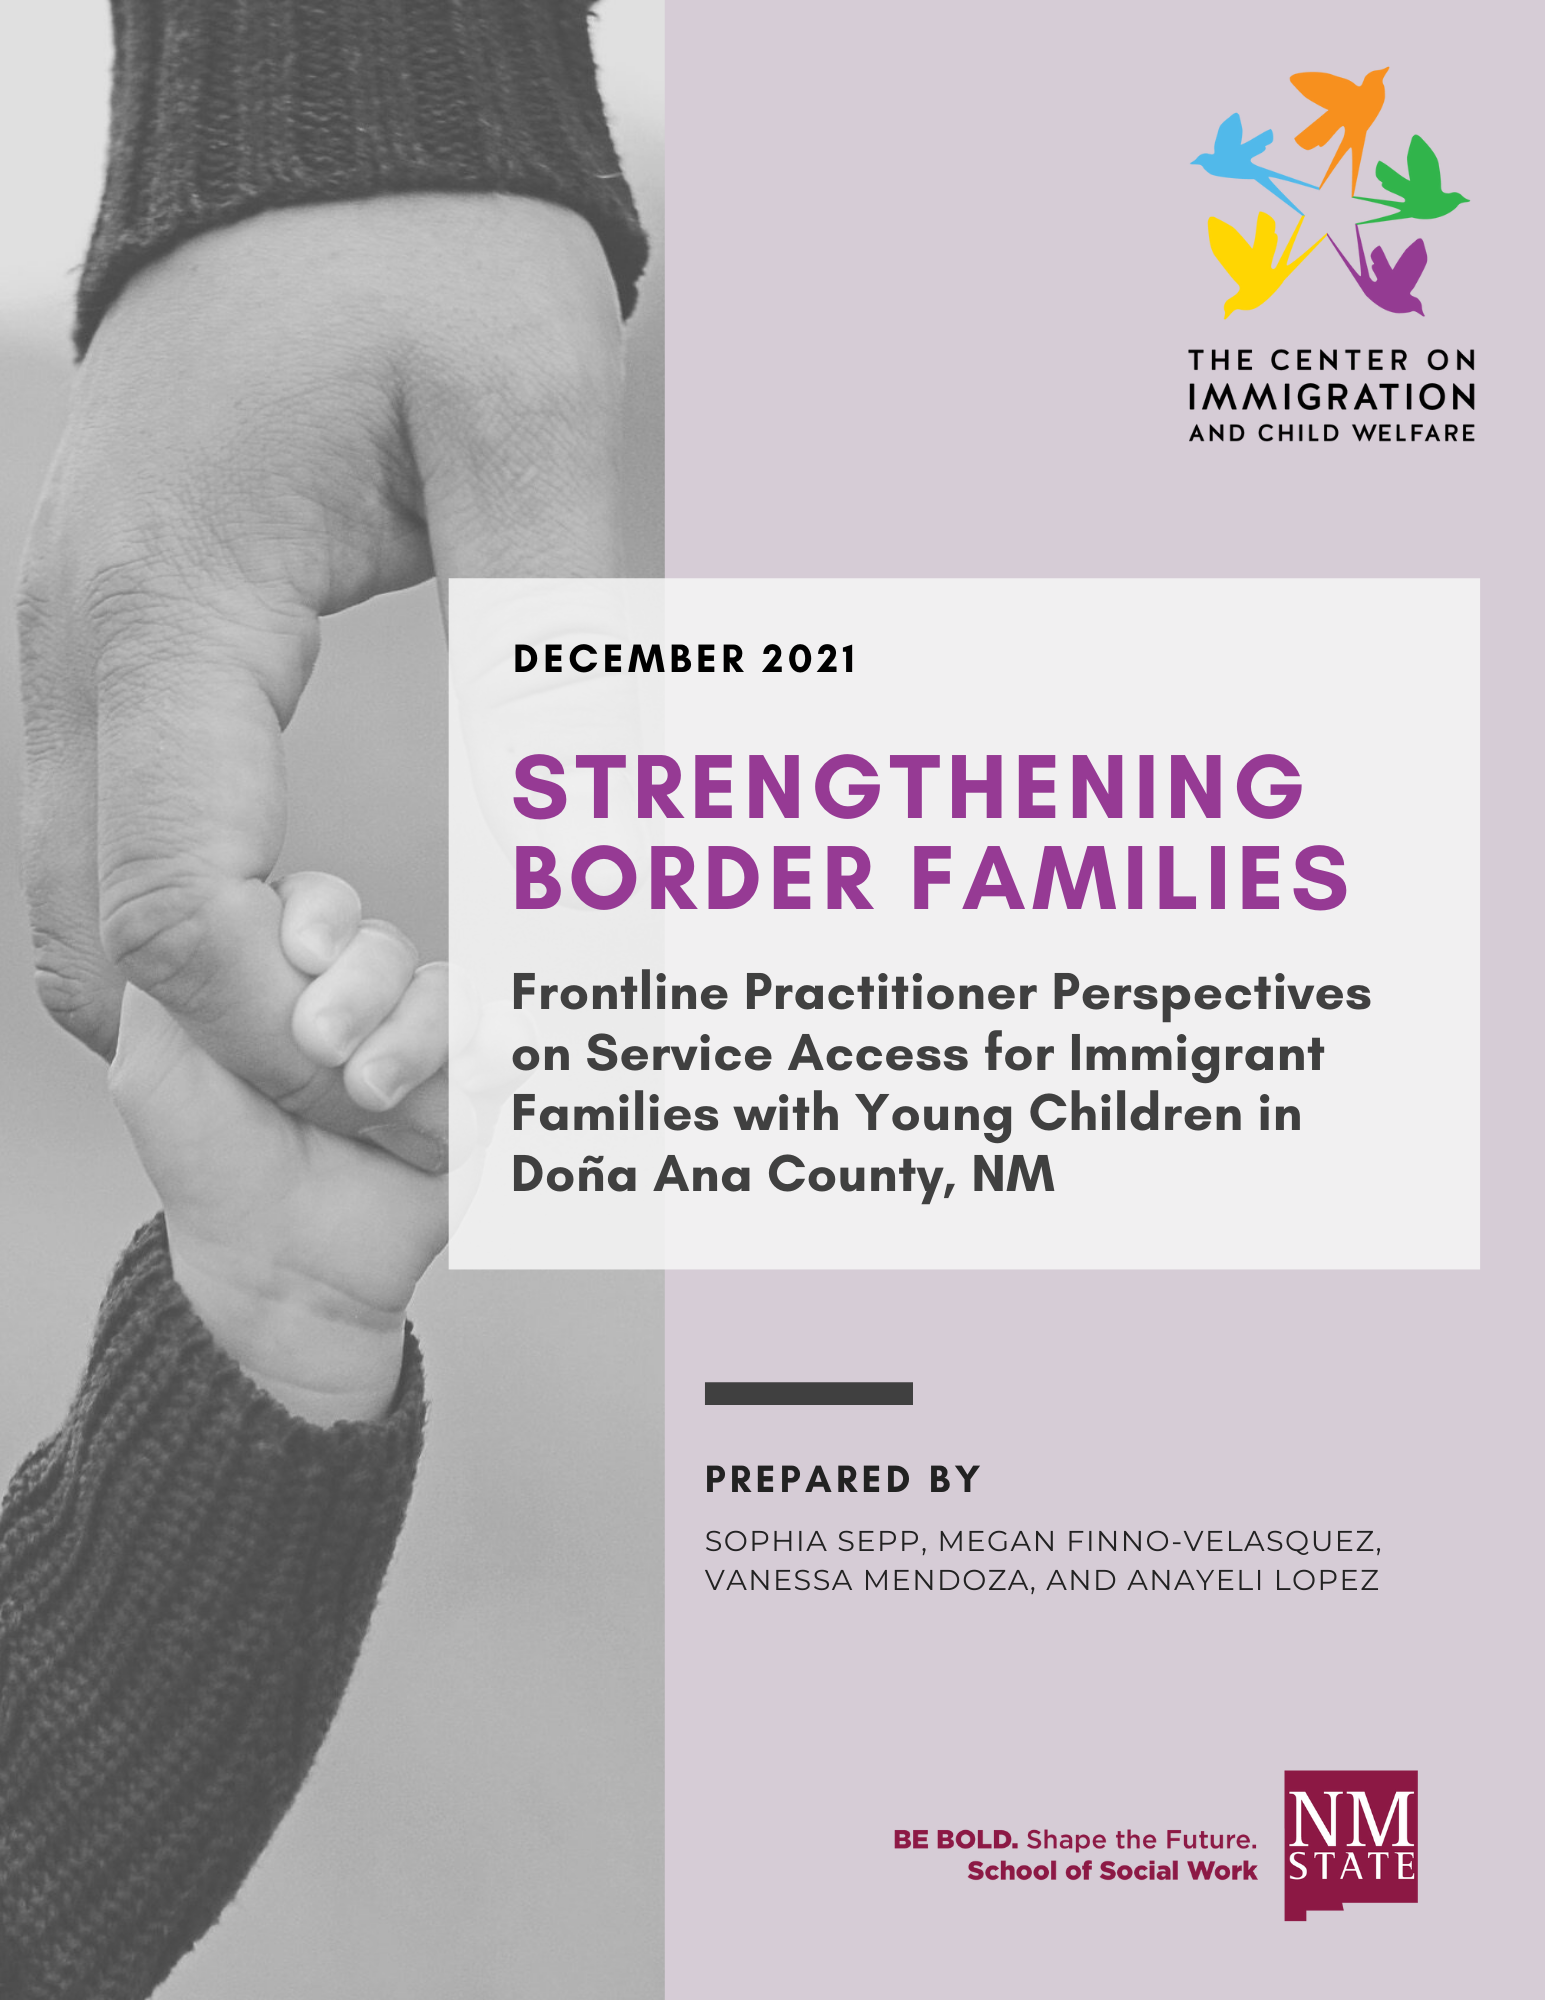 Strengthening Border Families Frontline Practitioner Perspectives on Service Access for Immigrant Families with Young Children